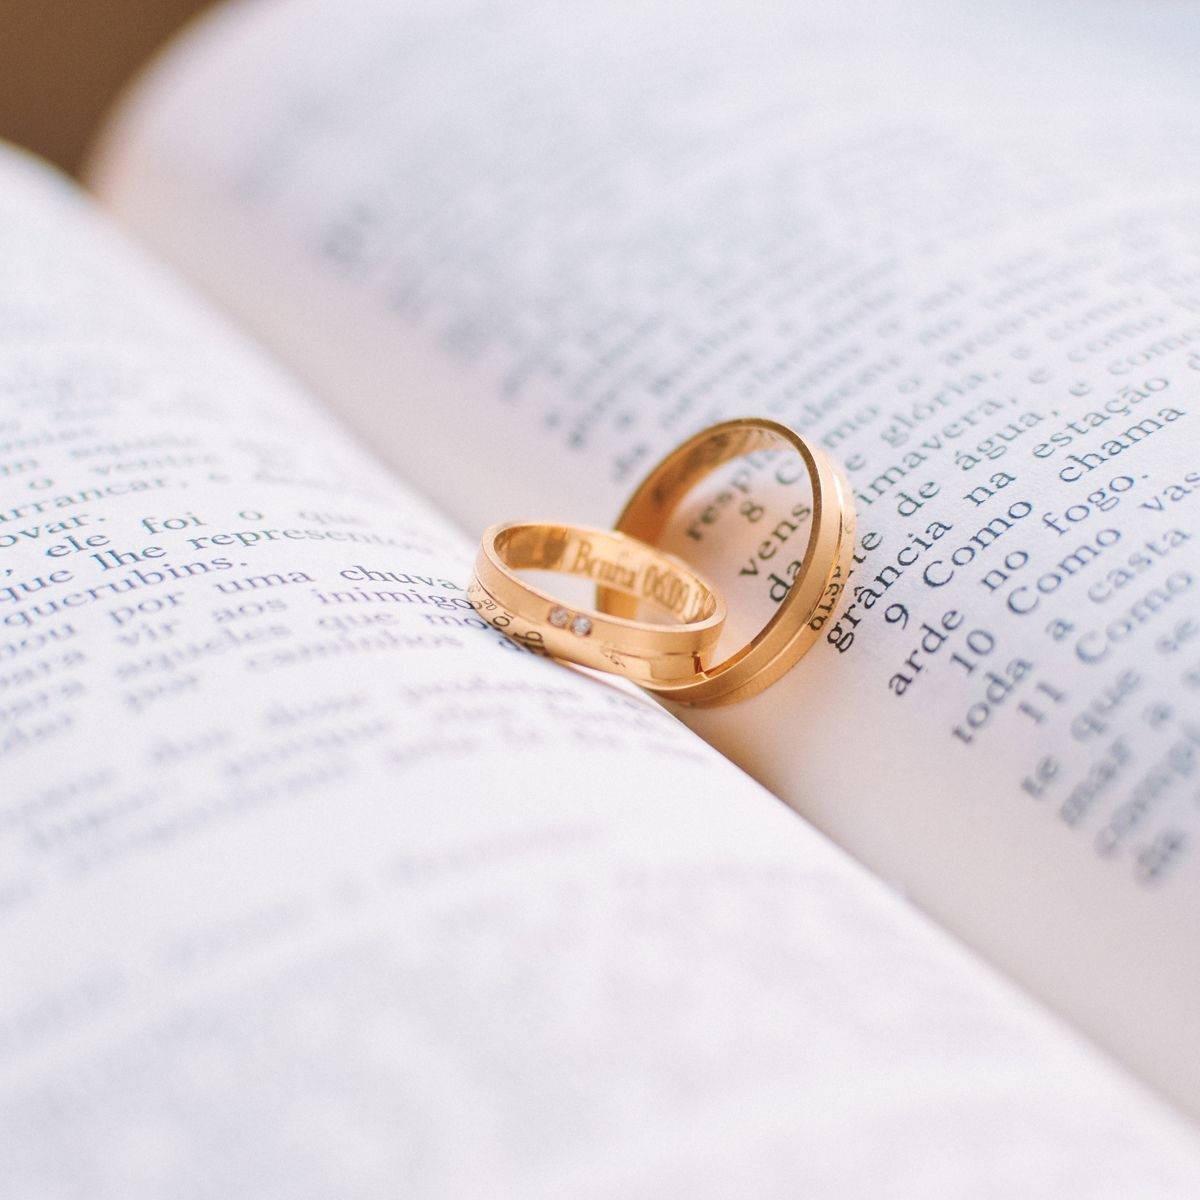 Gold Wedding Rings On Book